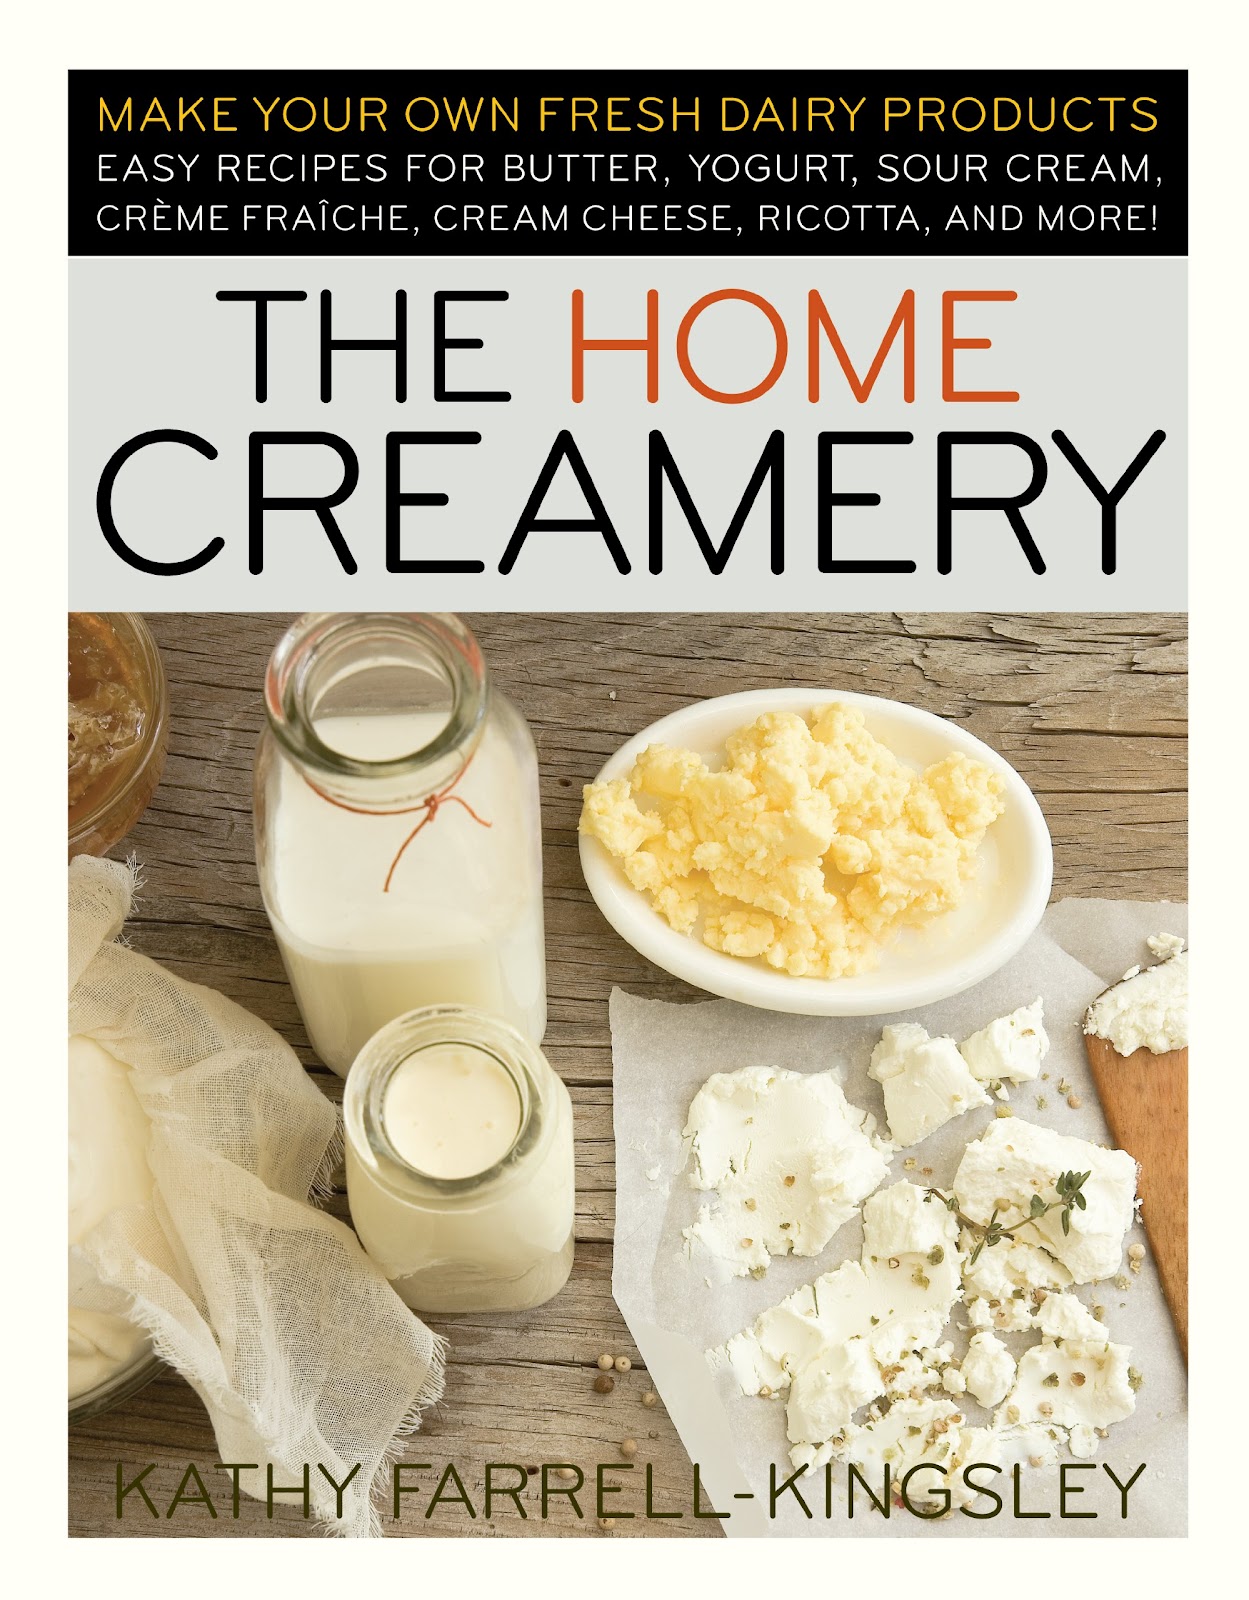 Download Ebook - The Home Creamery: Make Your Own Fresh Dairy Products; Easy Recipes for Butter, Yogurt, Sour Cream, Creme Fraiche, Cream Cheese, Ricotta, and More!